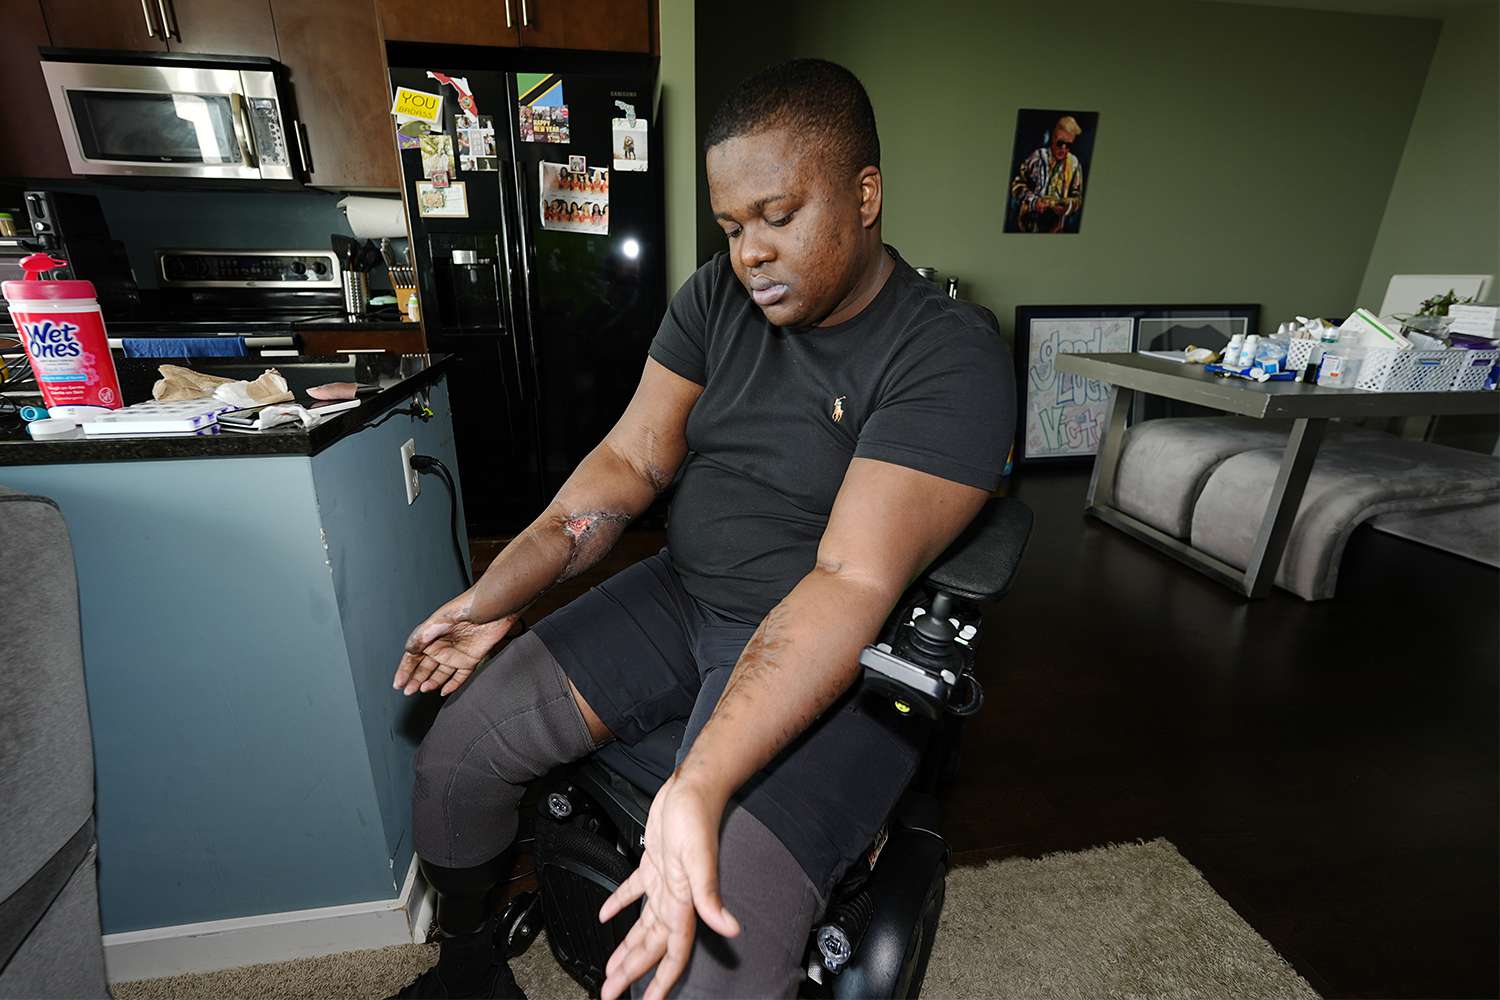 Ex-Police Recruit Files Suit After Losing Legs in Alleged ‘Barbaric' Hazing Ritual: 'No Idea What My Future Holds'